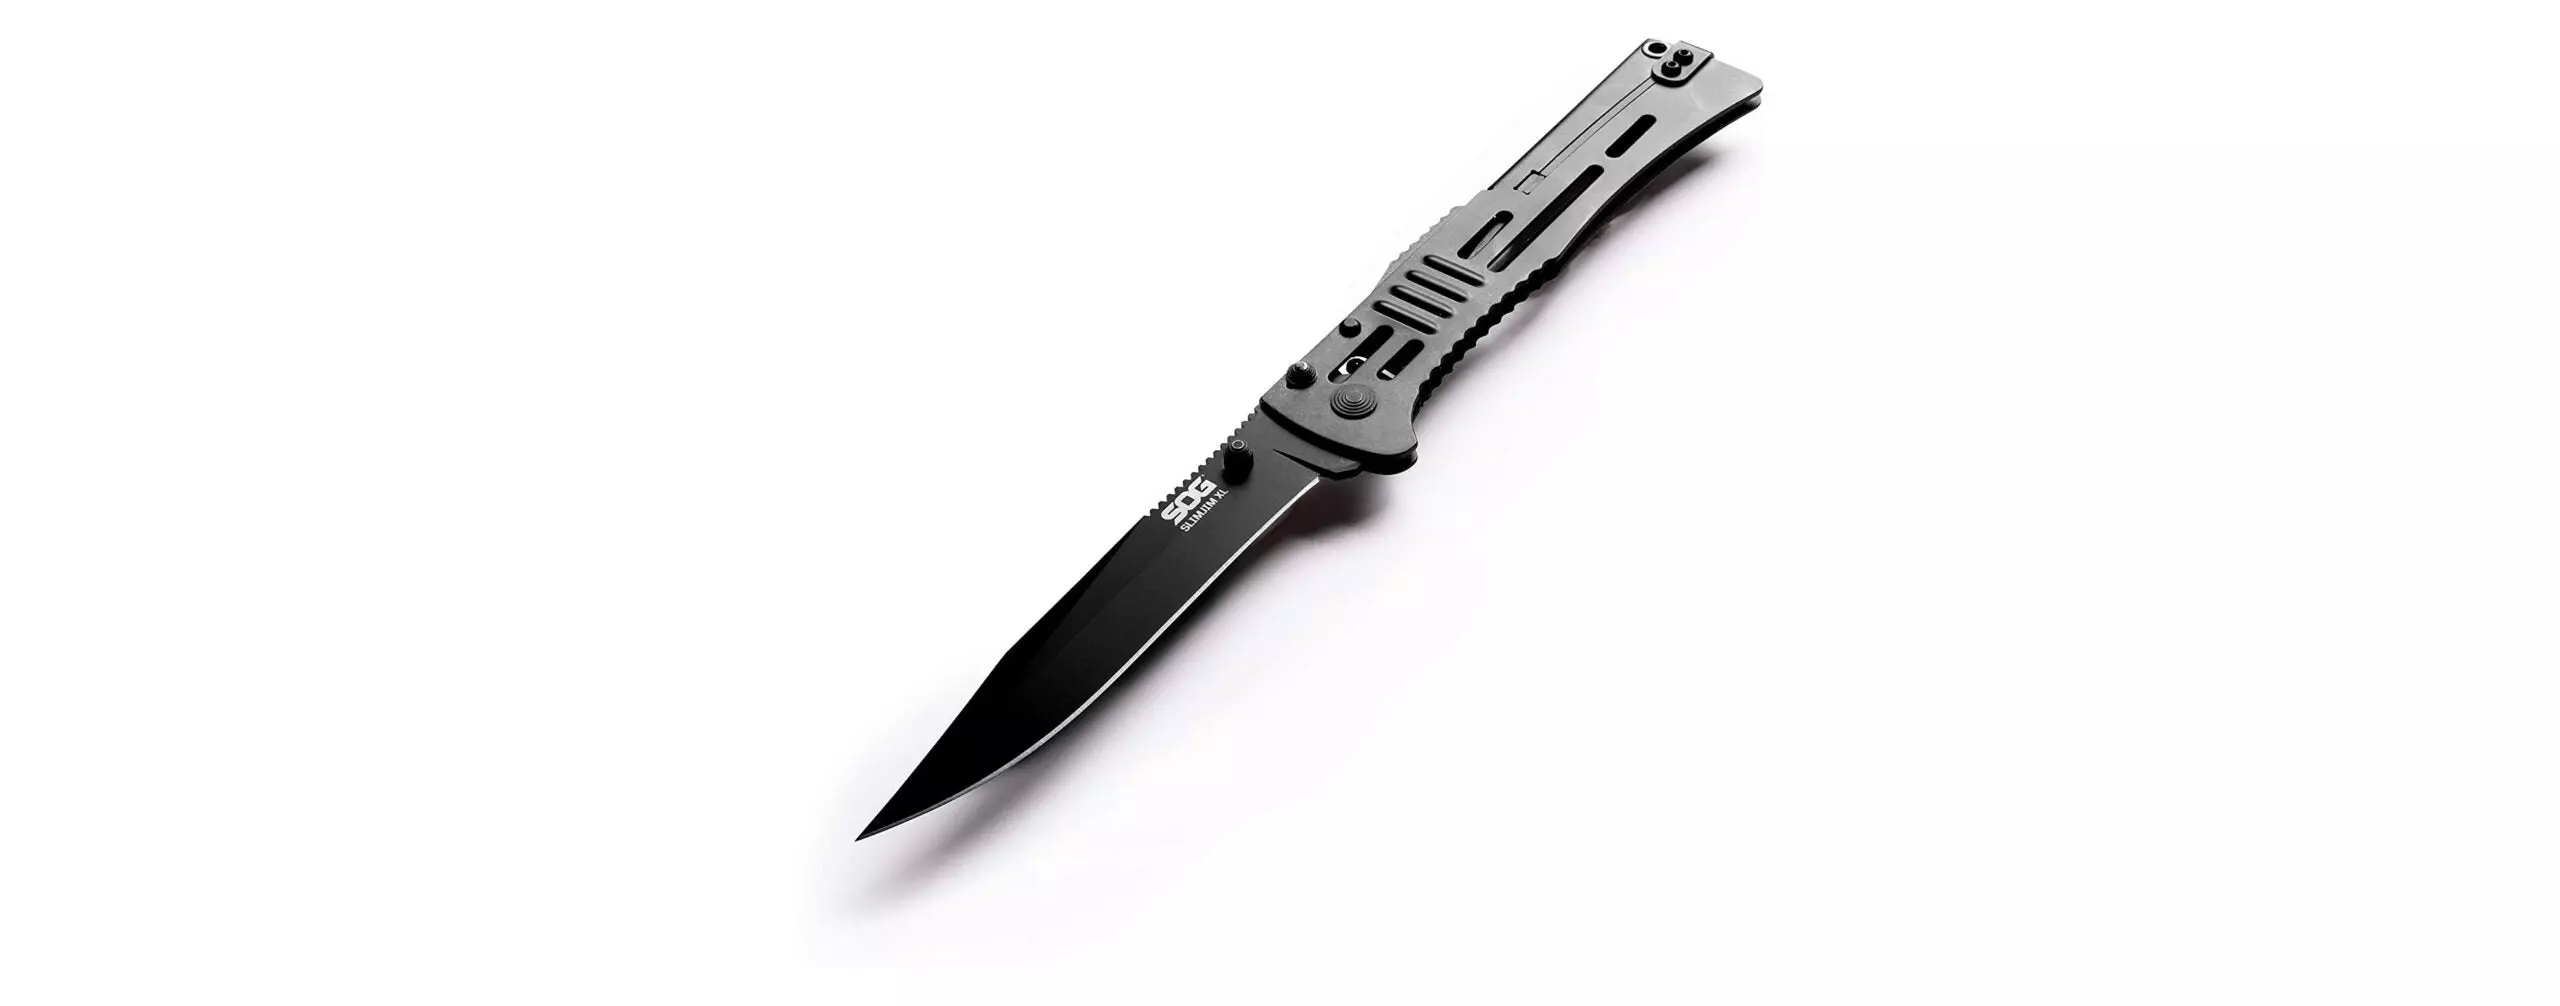 The Best Spring Assisted Knives (Review and Buying Guide) of 2022